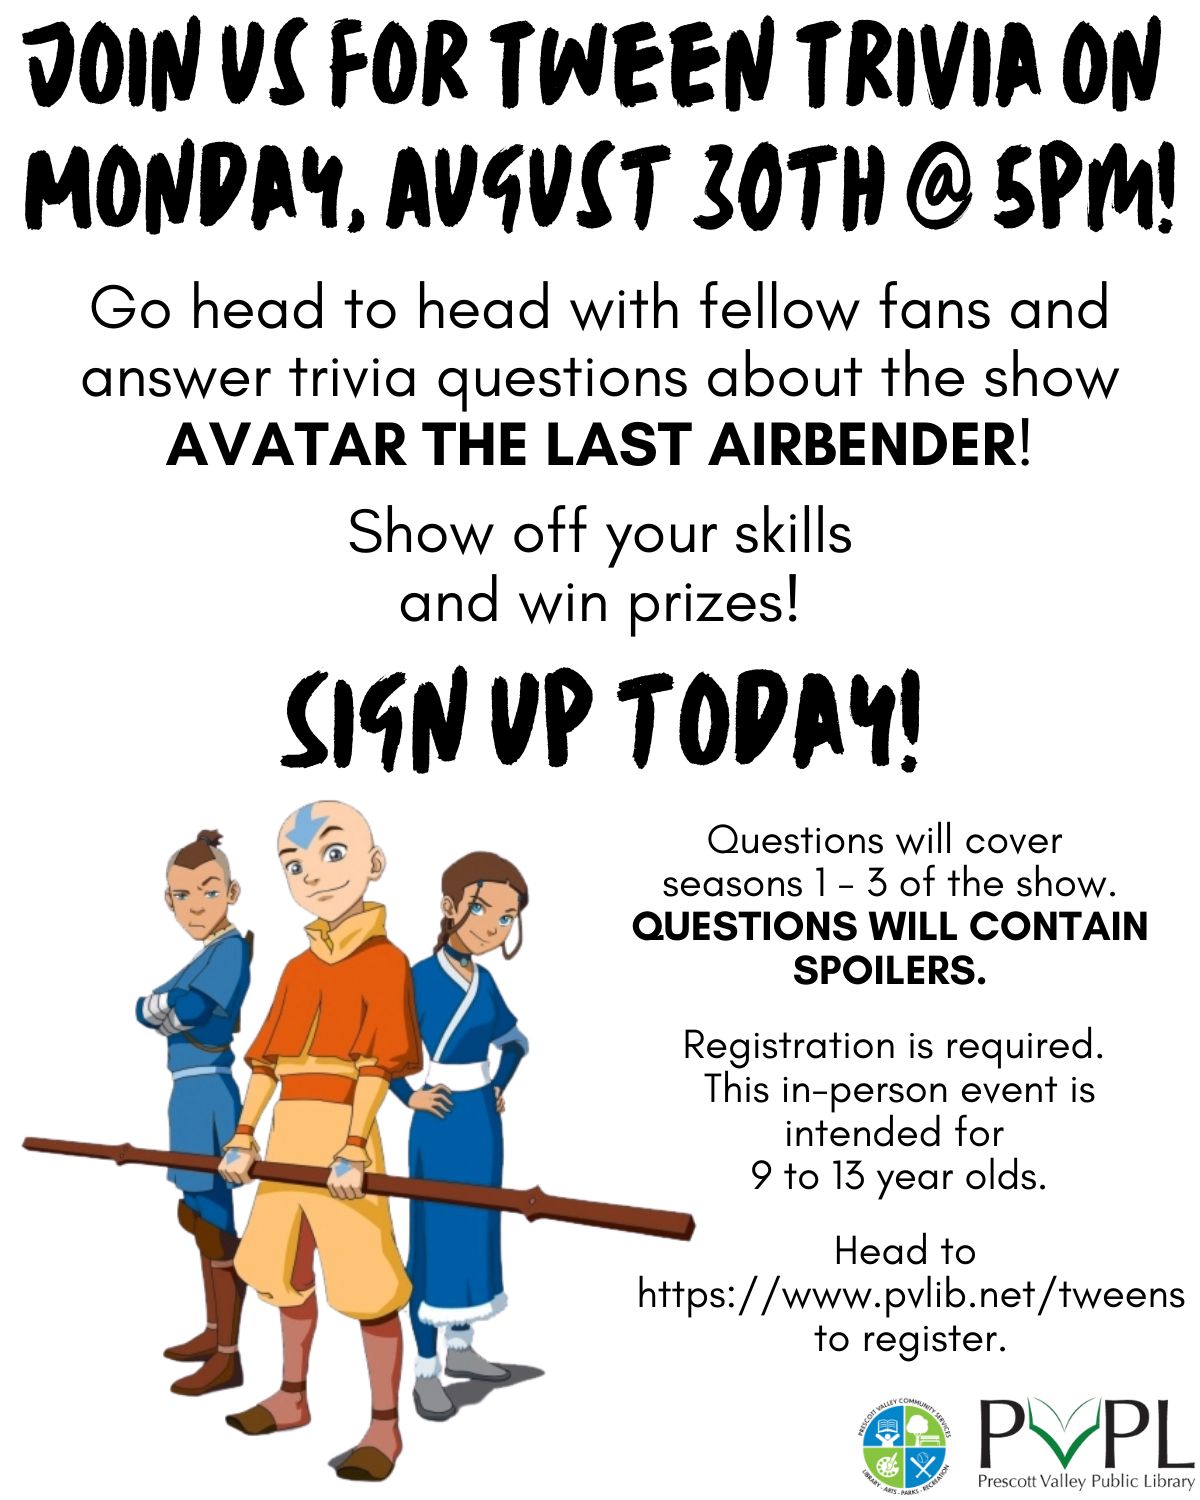 Join us for Tween Trivia at 5pm on August 30! Answer questions about the show Avatar the Last Airbender and win prizes!